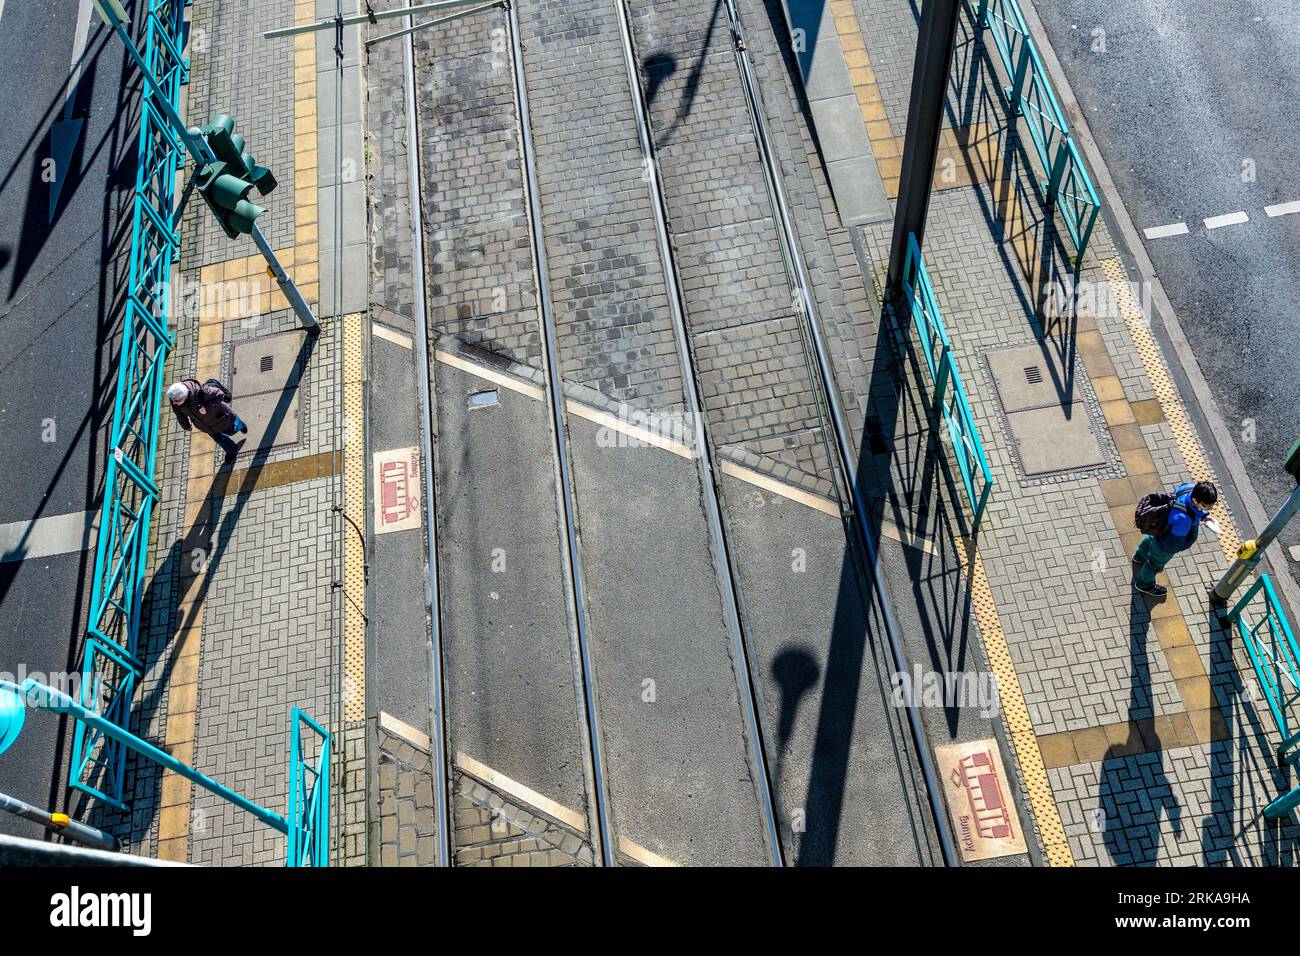 Cologne, Germany - February 12, 2014: aerial of streetcar stop with waiting passenger. Stock Photo